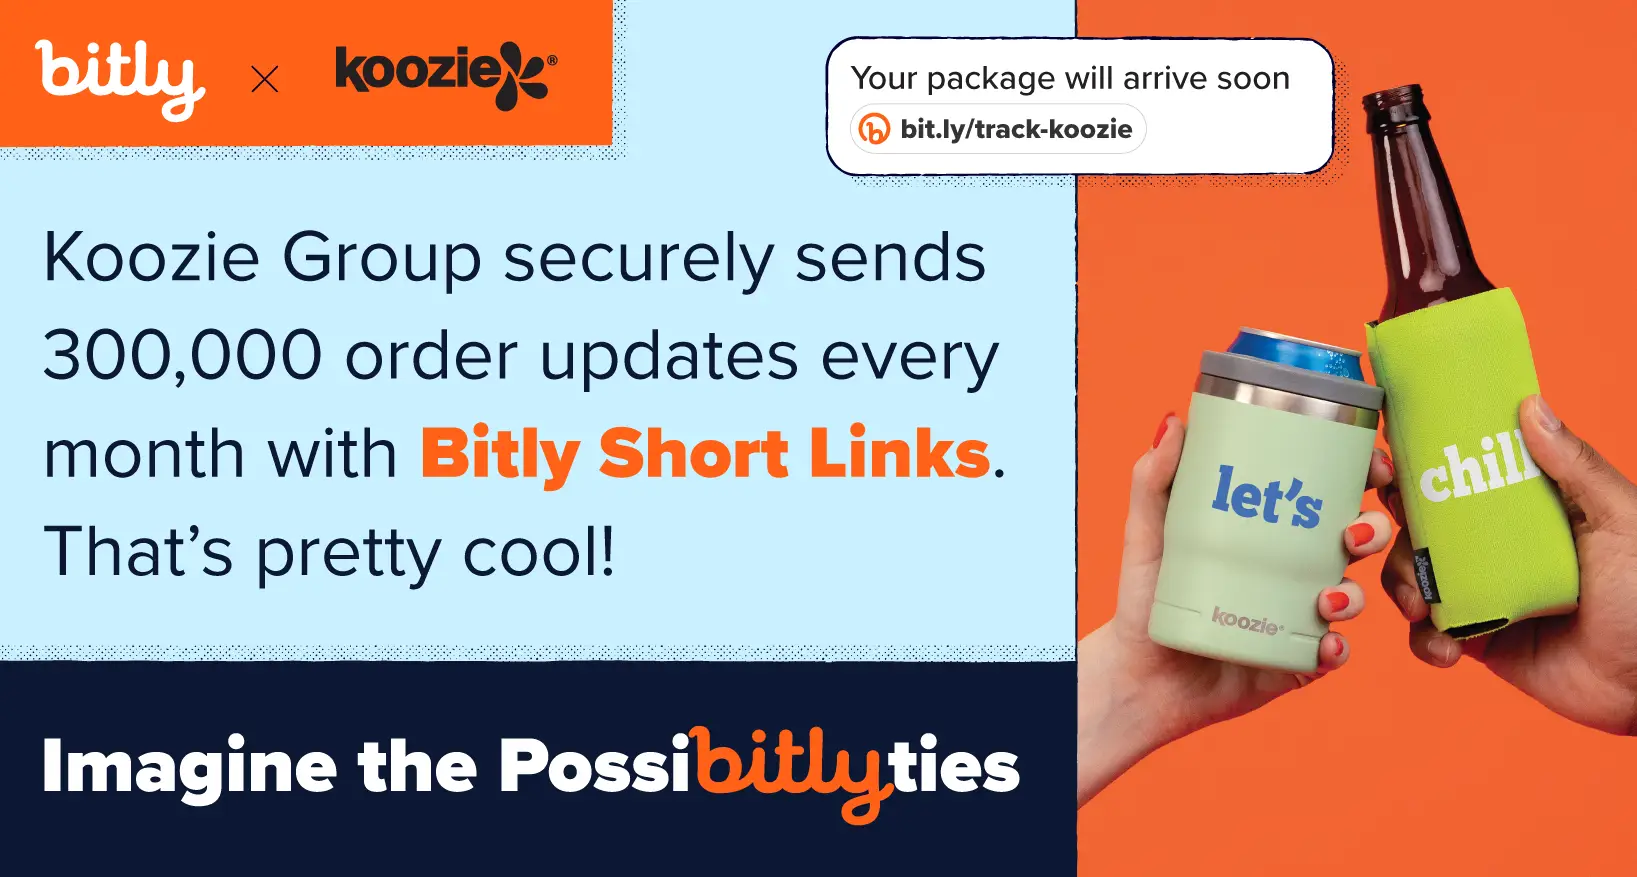 A bottle and a can doing cheers next to info about how Koozie Group uses Bitly short links.